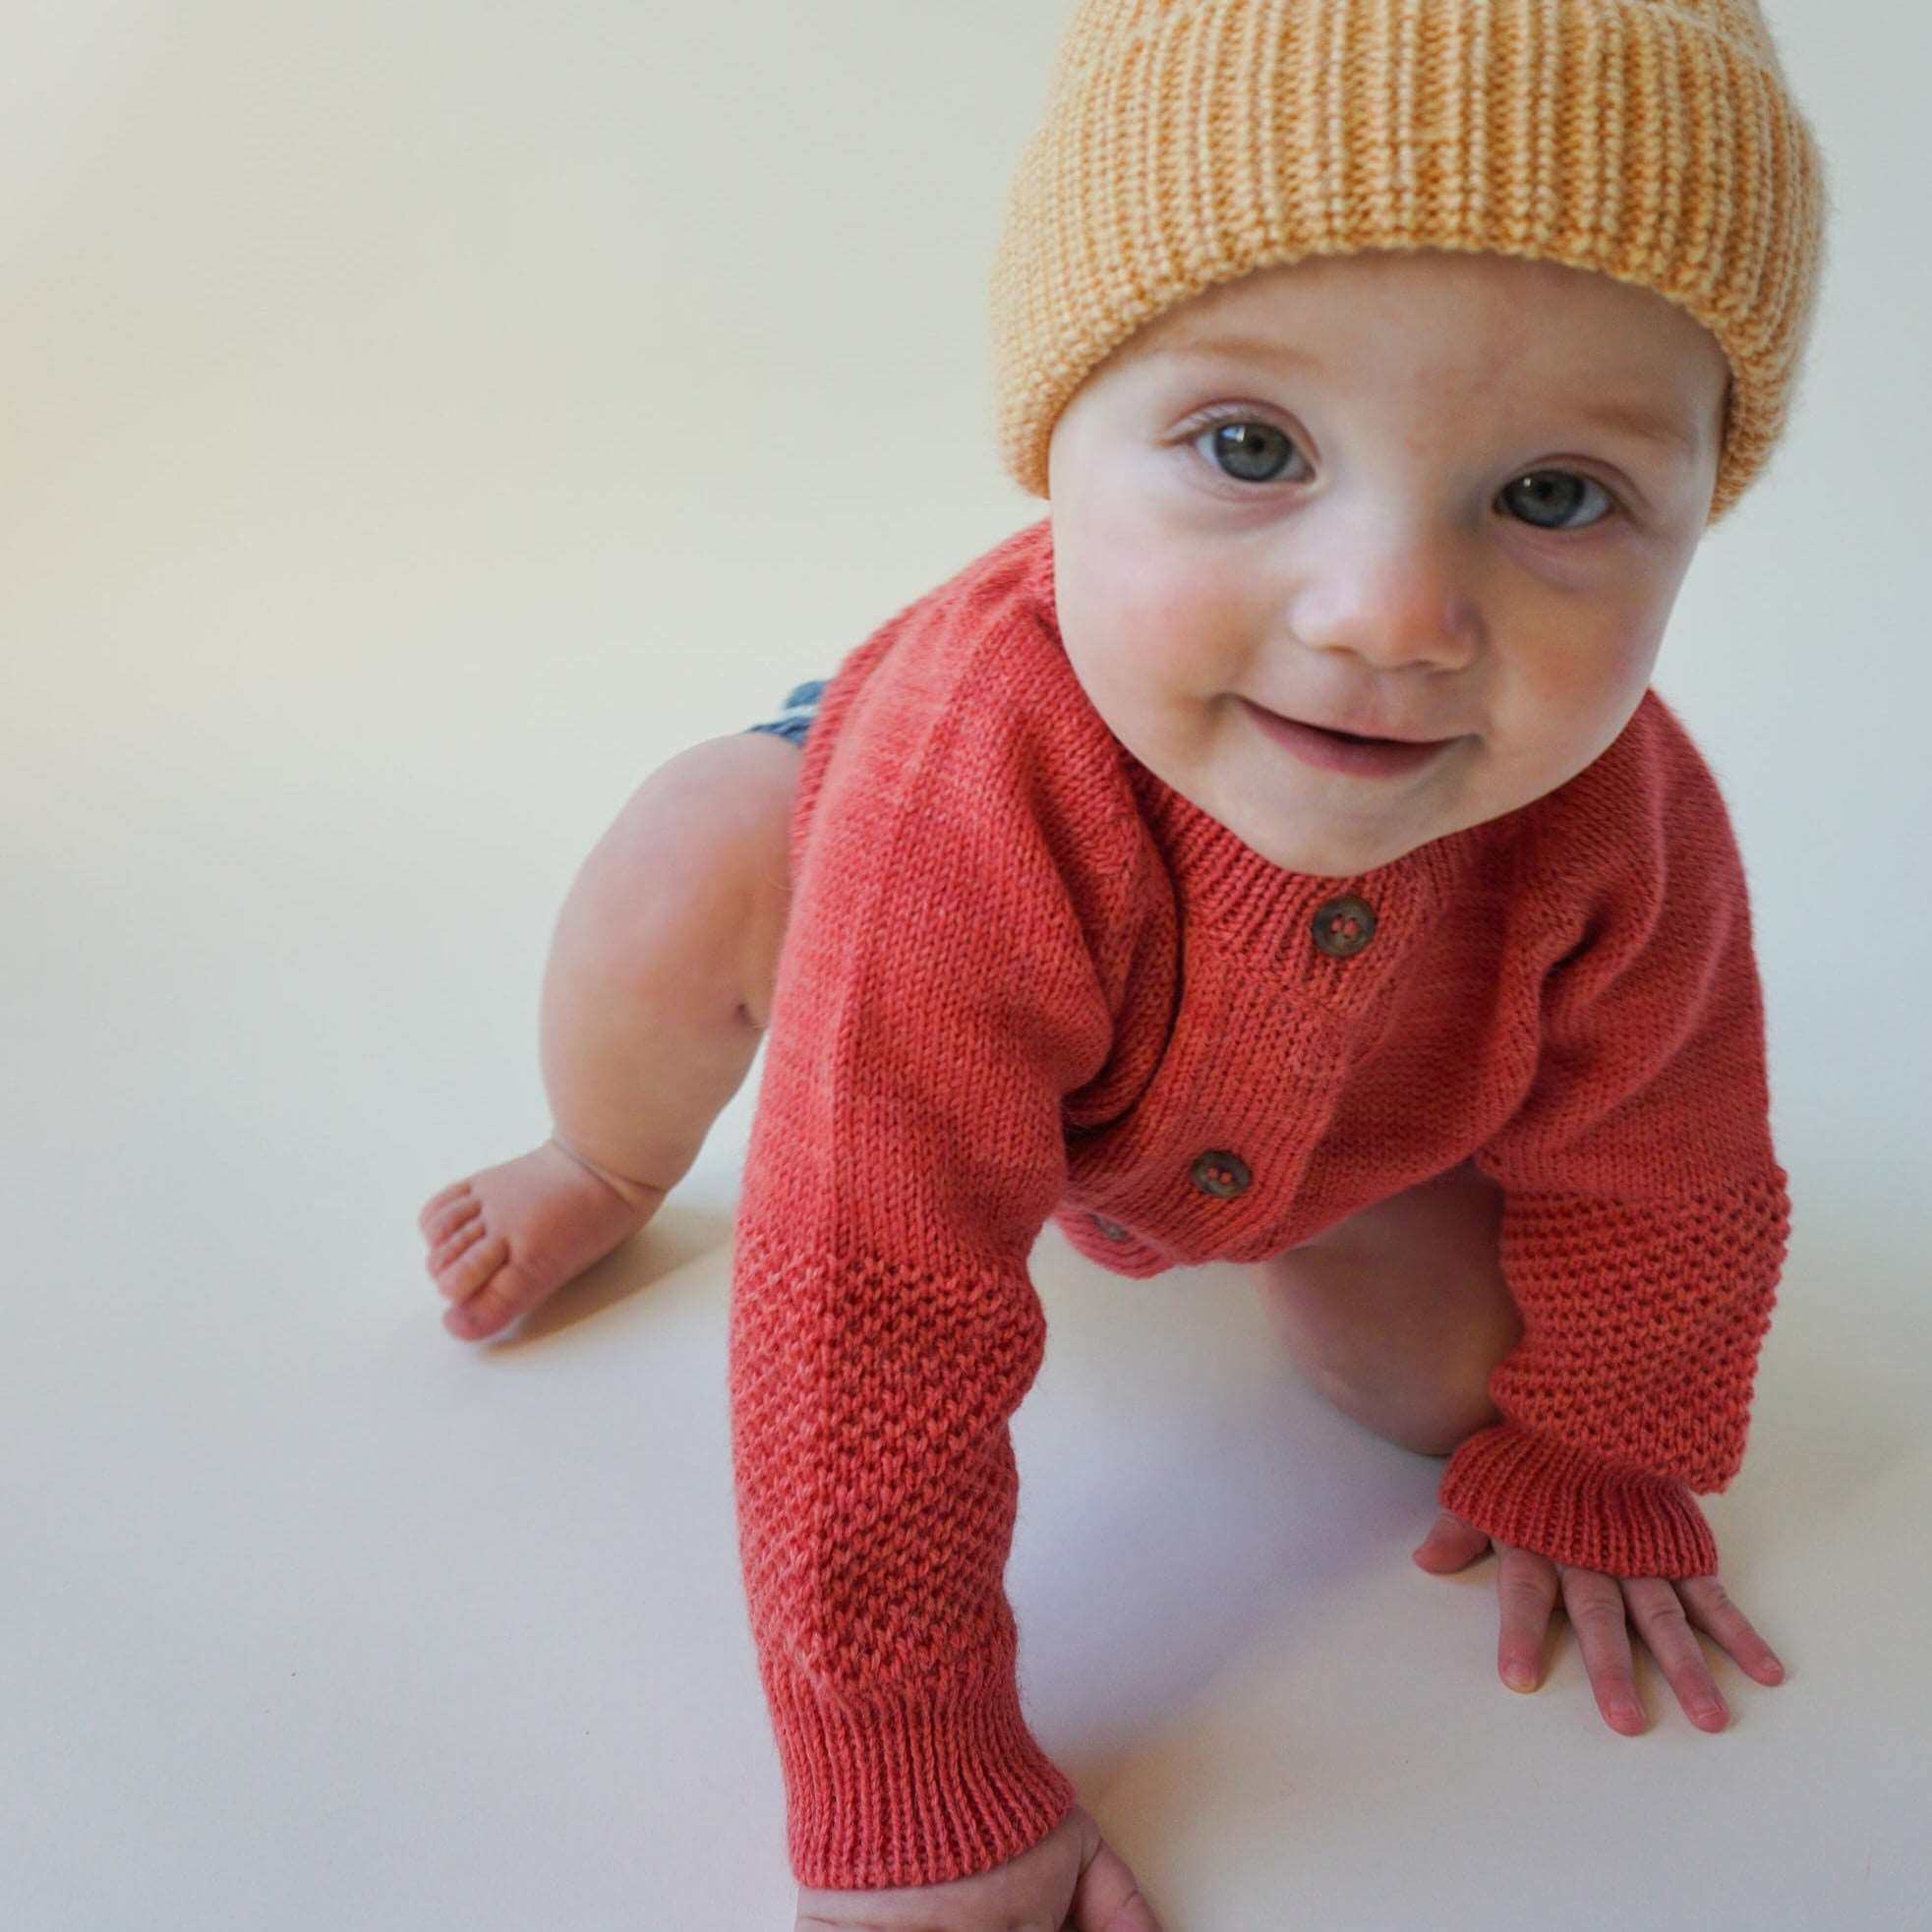 Toddler playing in red 2-Texture Raglan Sleeve Cardigan and yellow beanie knit hat